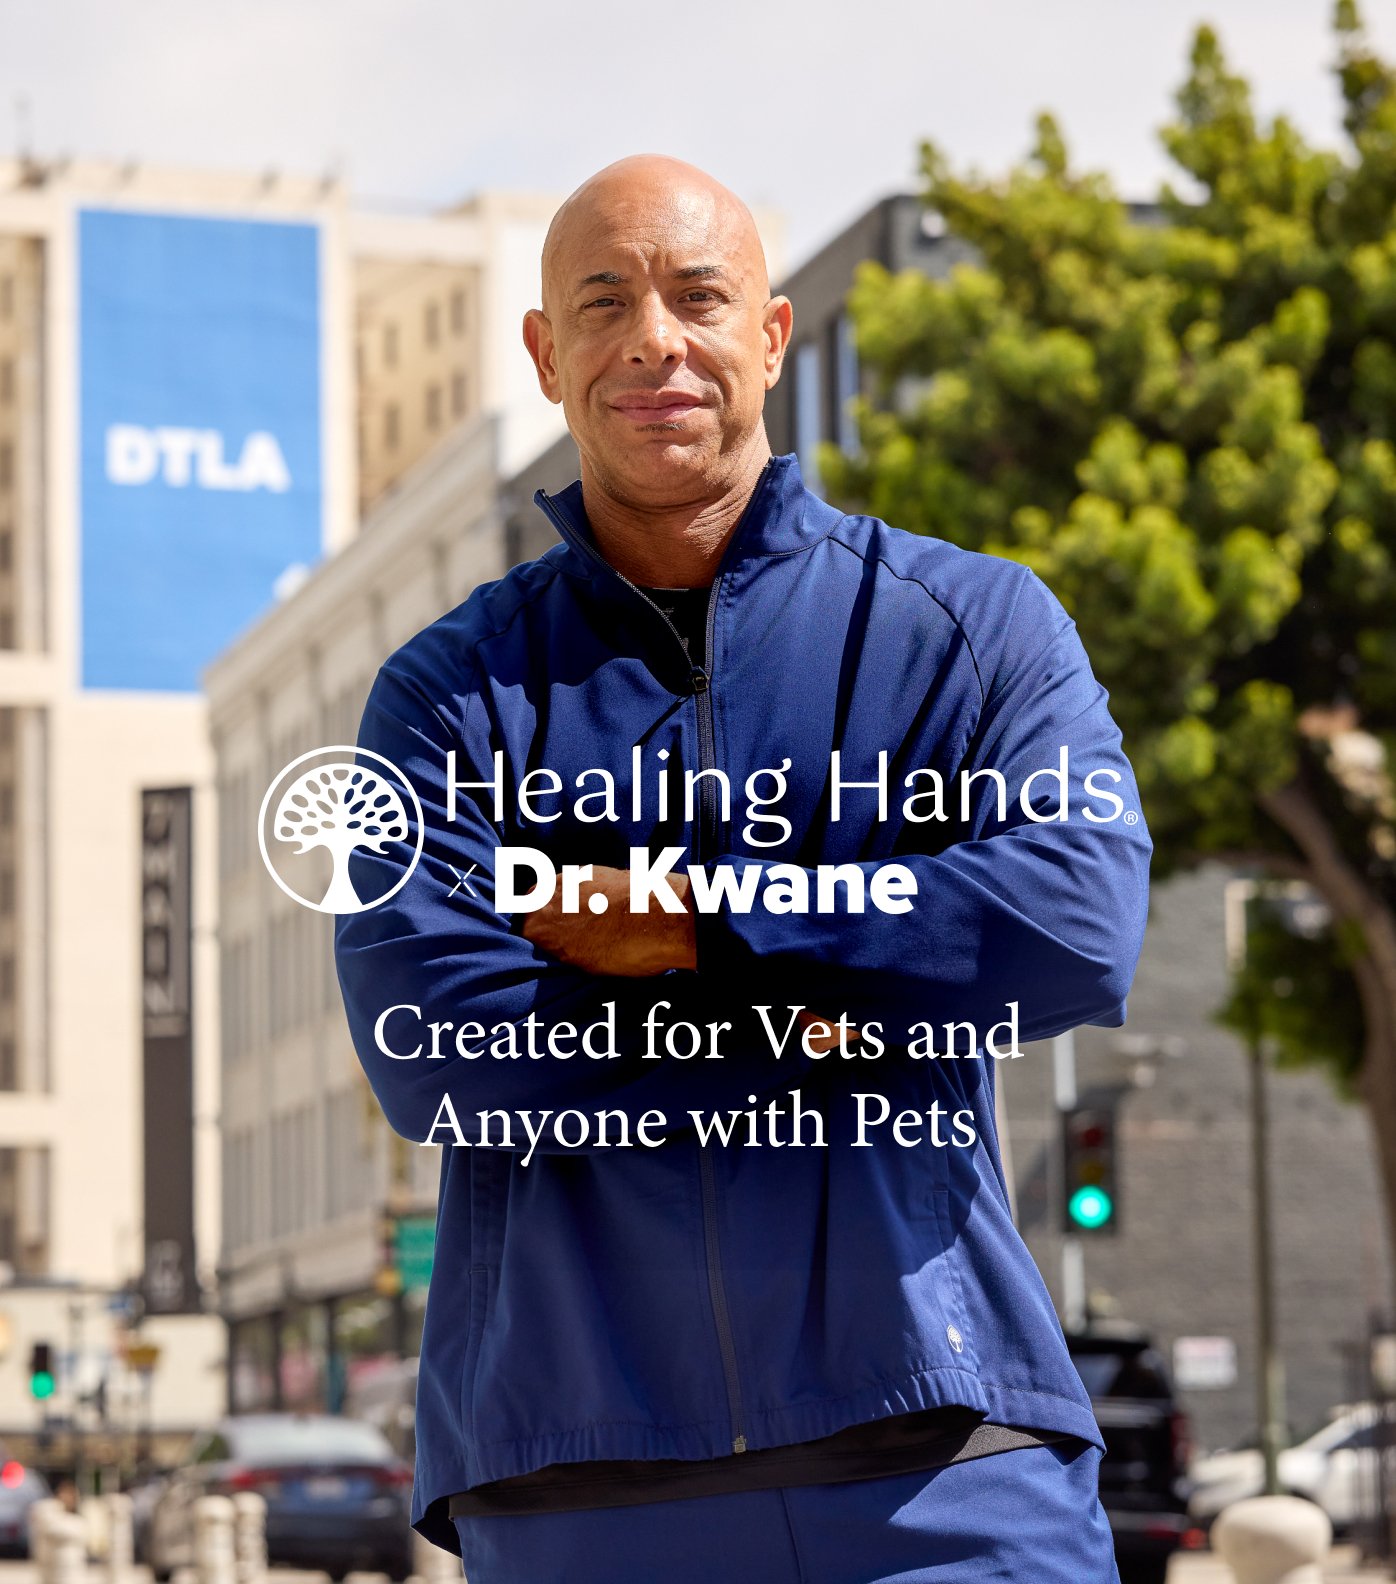 dr. kwane x healing hands. created for vets and anyone with pets.